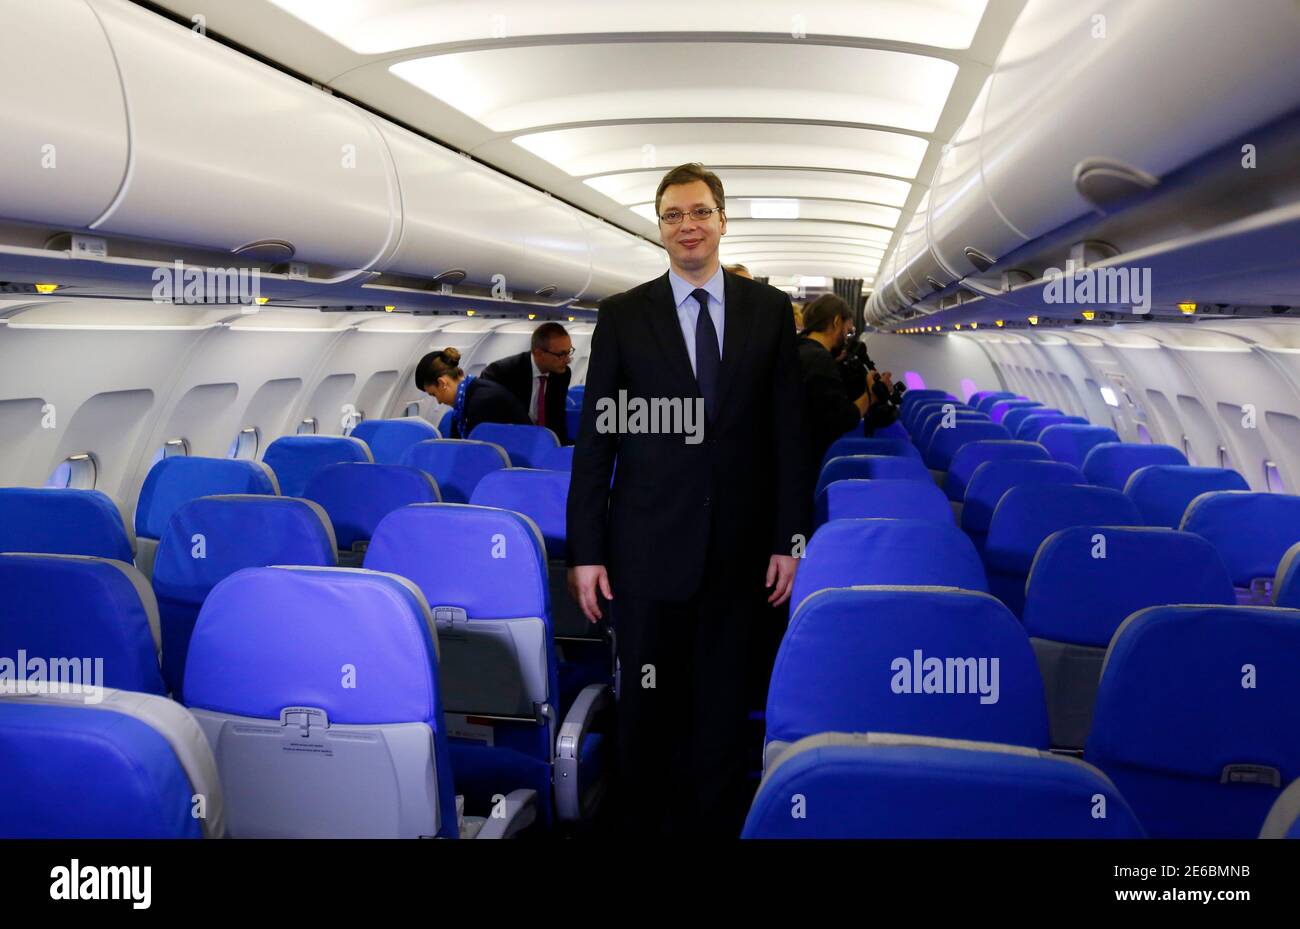 Serbia's Deputy Prime Minister Aleksandar Vucic walks inside a new Airbus 319 plane in Belgrade October 25, 2013. From animal feed to missiles and loans, Serbia is banking on an unlikely alliance with the United Arab Emirates to upgrade its vital farming industry, revive military production and get badly needed cheaper finance. The first deal was a $40 million equity investment by Abu Dhabi's Etihad airline in Serbia's indebted JAT Airways. Picture taken October 25, 2013. REUTERS/Marko Djurica (SERBIA - Tags: BUSINESS TRANSPORT POLITICS) Stock Photo